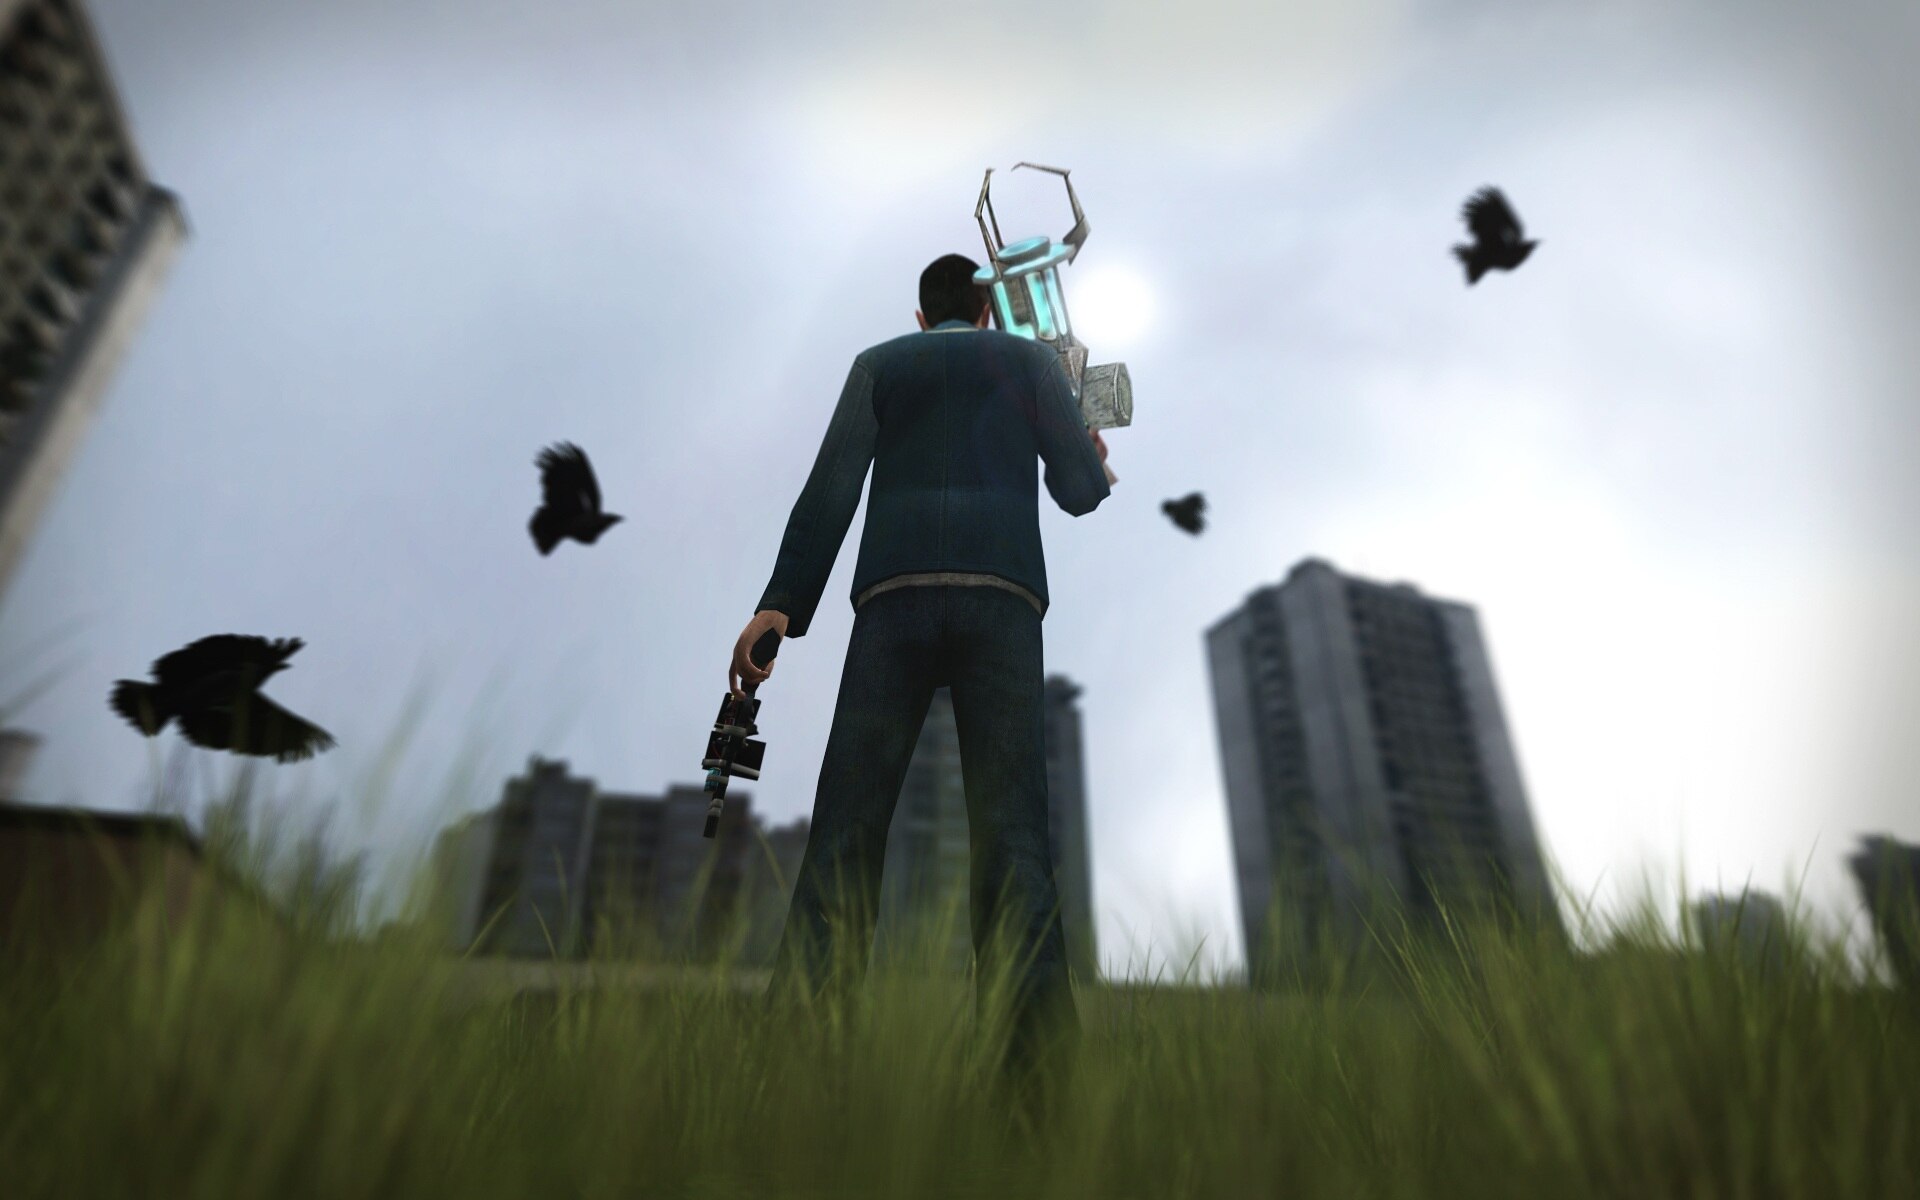 Throwback] What was the first thing you made in Garry's Mod that got you  hooked? I made this in 2007 : r/gmod